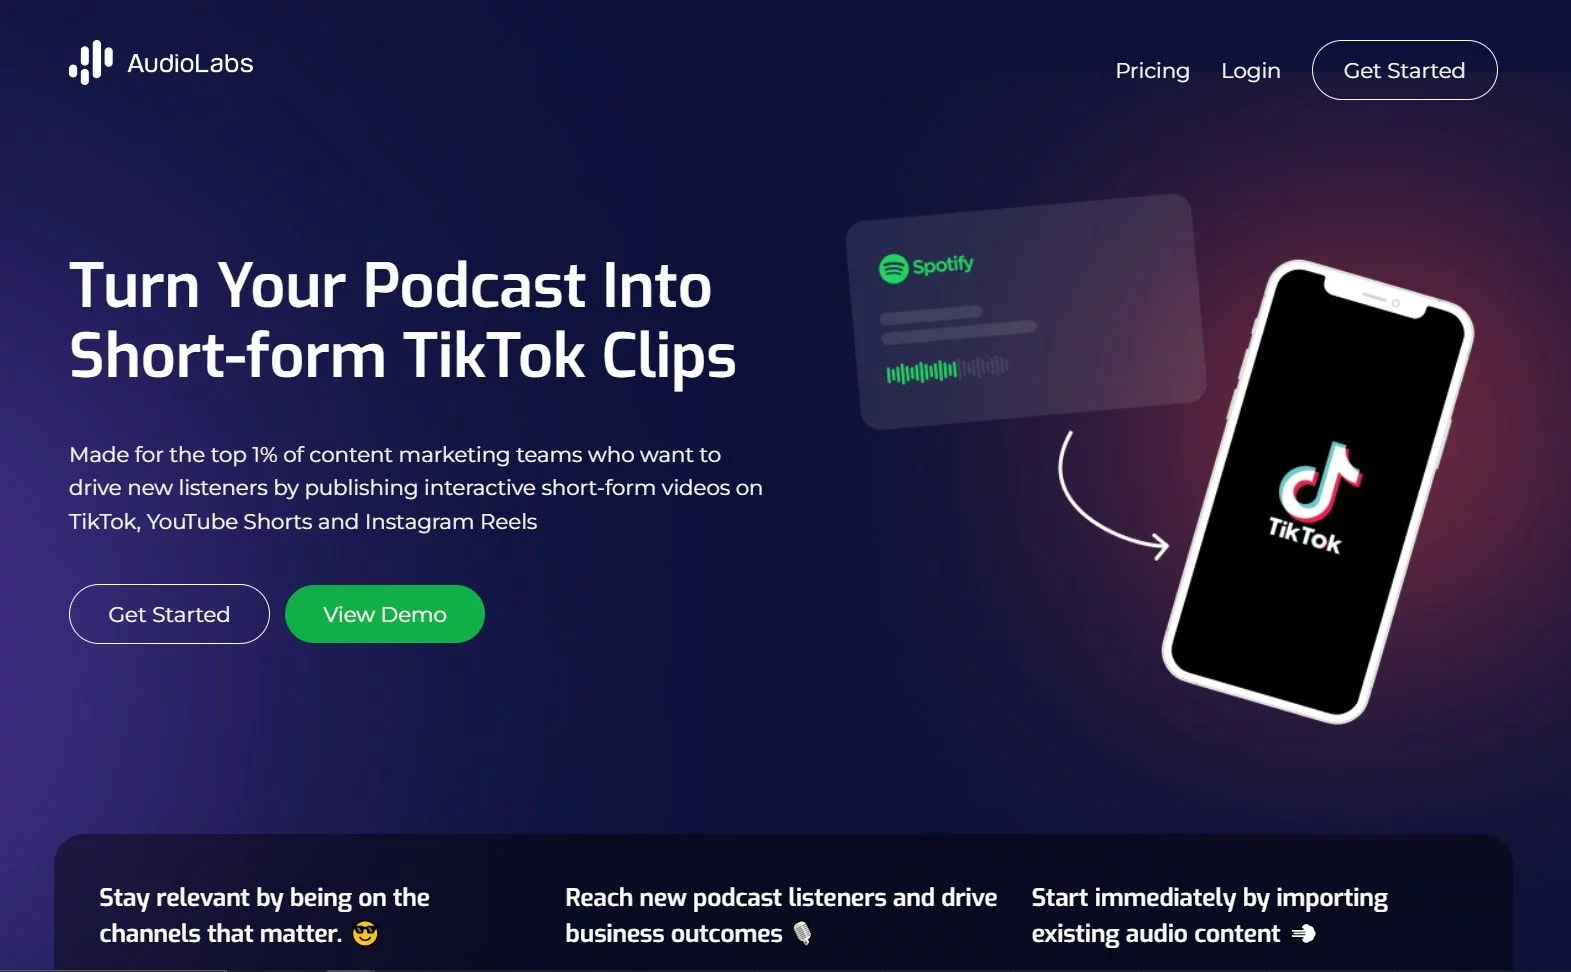  Turn podcast into short-form videos ideal for